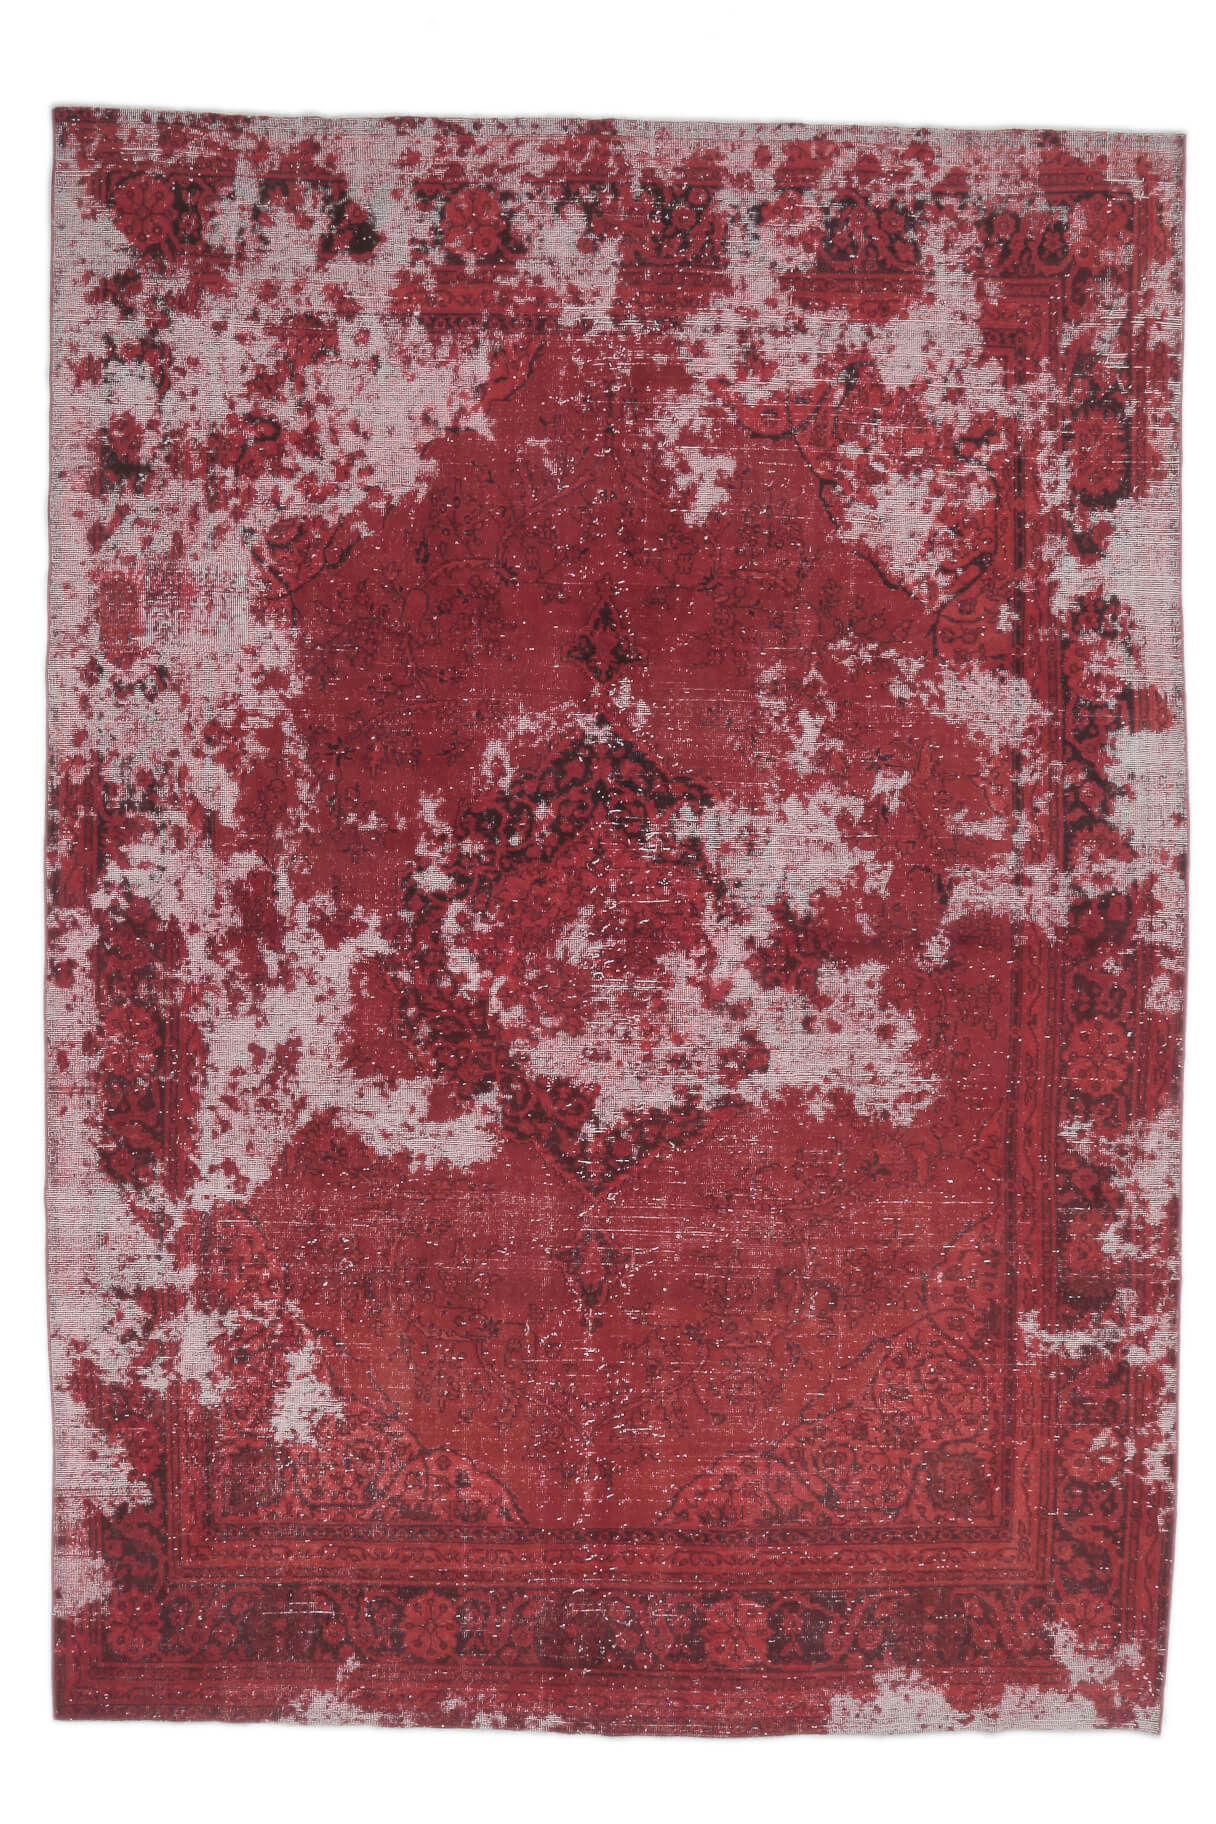 8x12 Overdyed Distressed Area Rug, Over Dyed Distressed Rugs